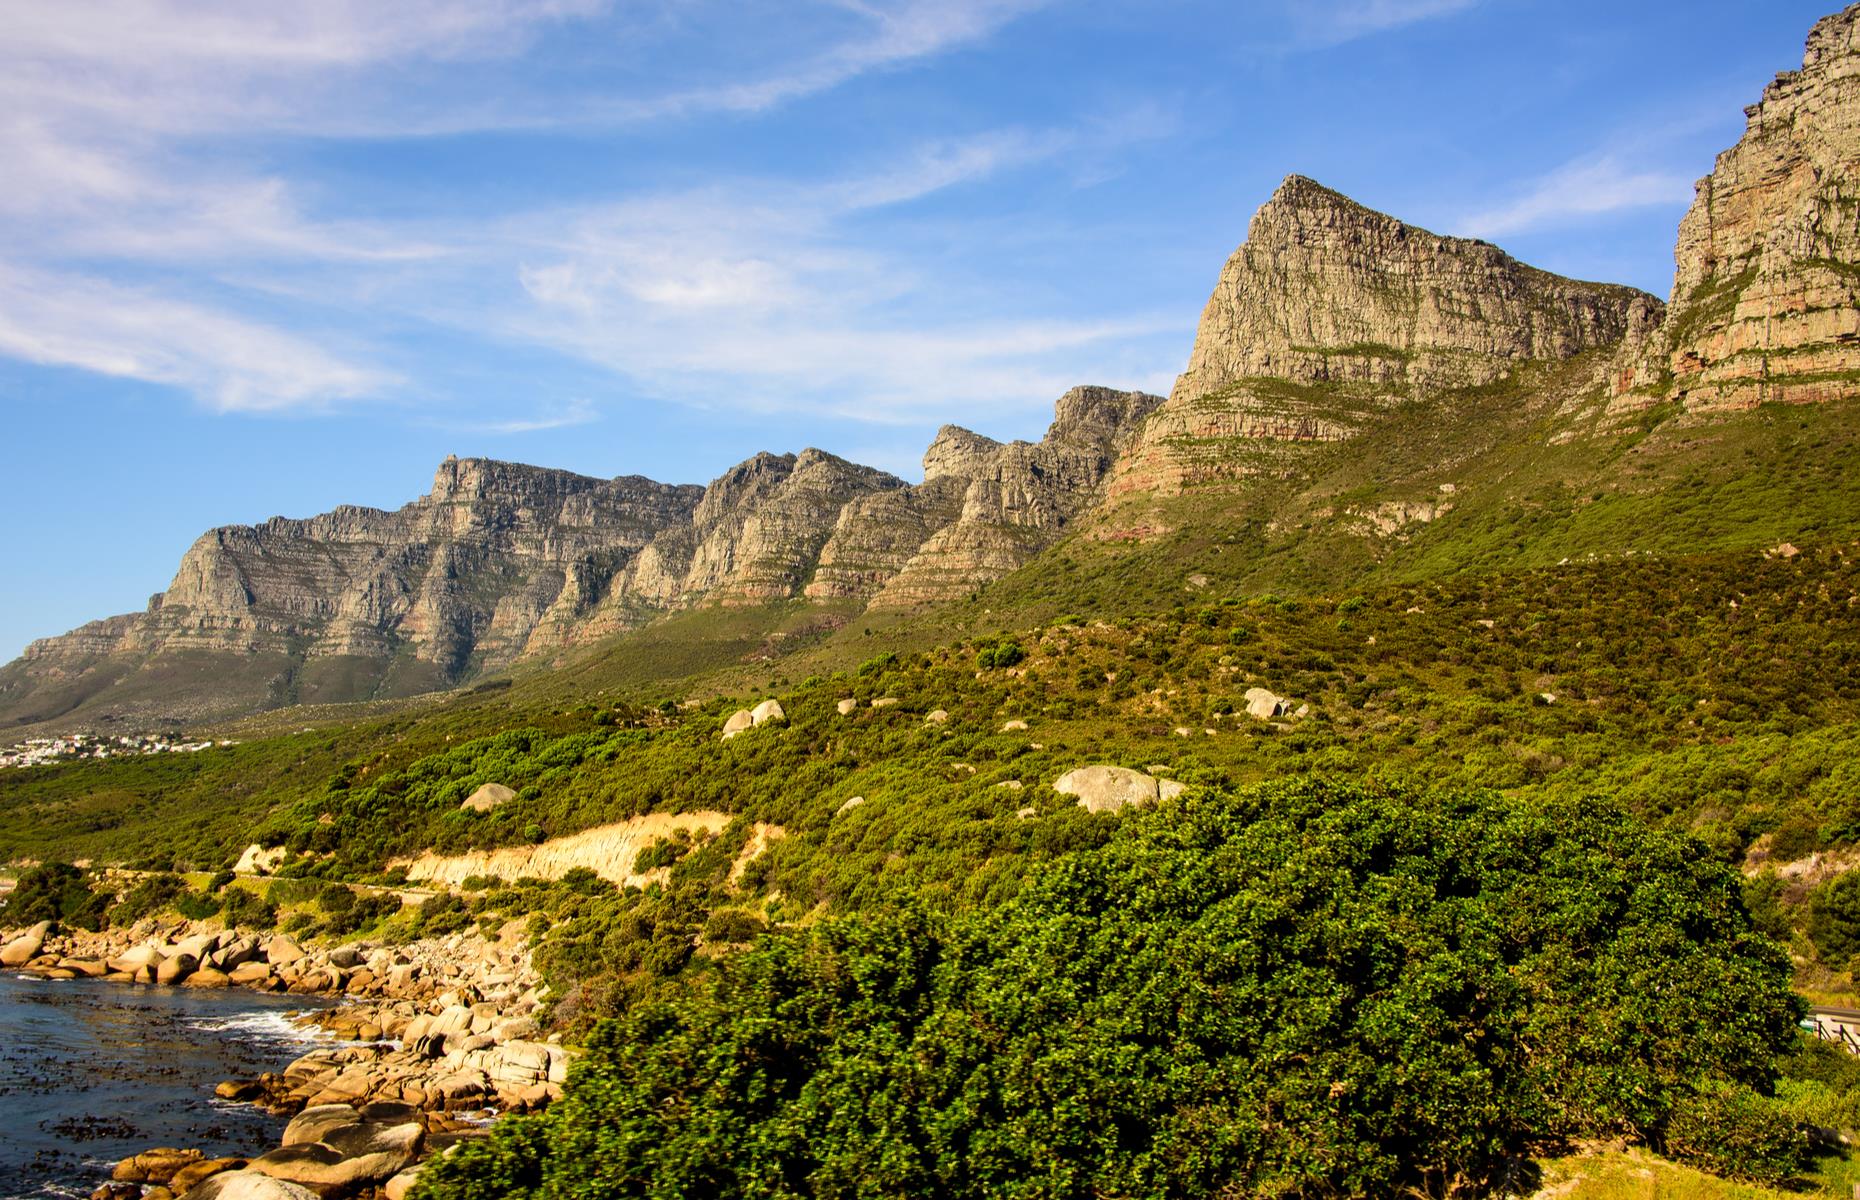 <p>Pass through the jungle-esque Skeleton Gorge on your way up the mountain. Or take the more challenging Kasteelspoort route along the jagged Twelve Apostles cliffs, and you’ll be rewarded with a seemingly death-defying photo opportunity at the Diving Board rock formation. Want a lift down? Take the Table Mountain Cable Car. </p>  <p><a href="https://www.loveexploring.com/galleries/115994/the-worlds-most-beautiful-remote-mountain-cabins?page=1"><strong>Check out the world's most beautiful remote mountain cabins</strong></a></p>